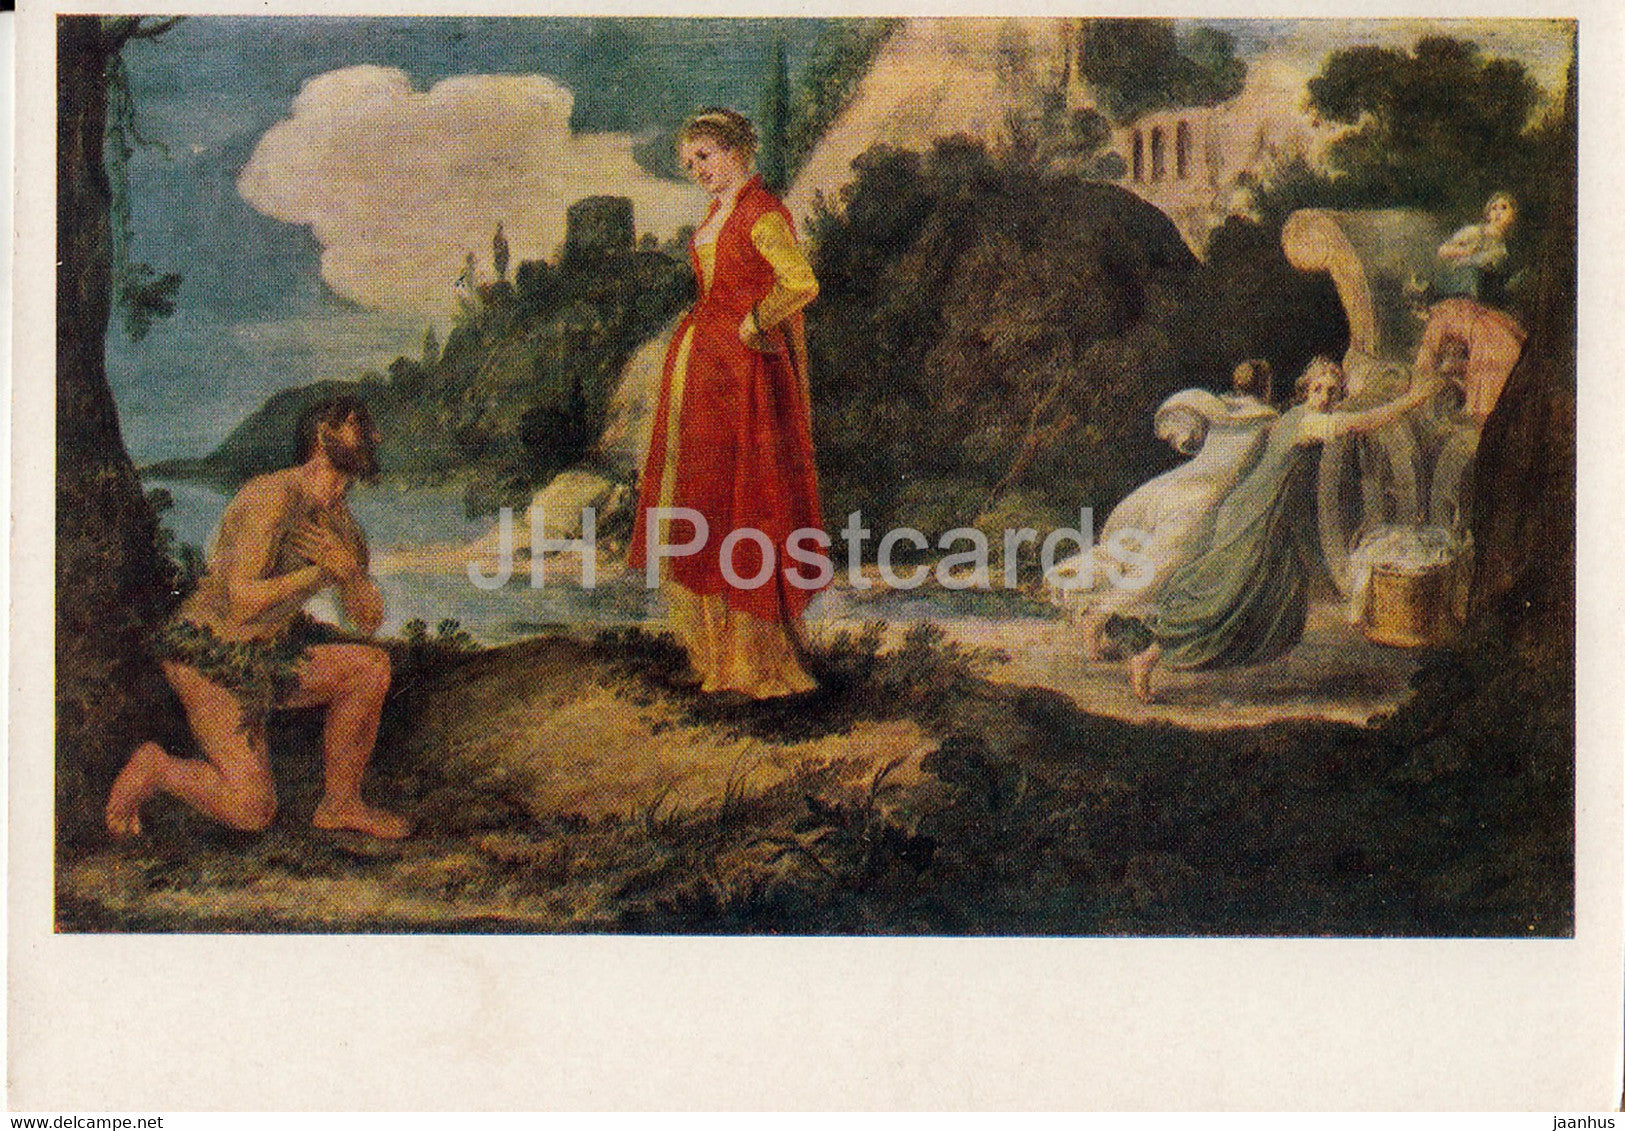 painting by Jan Symonsz Pynas - Ulysses and Nausicaa - Dutch art - Russia USSR - unused - JH Postcards